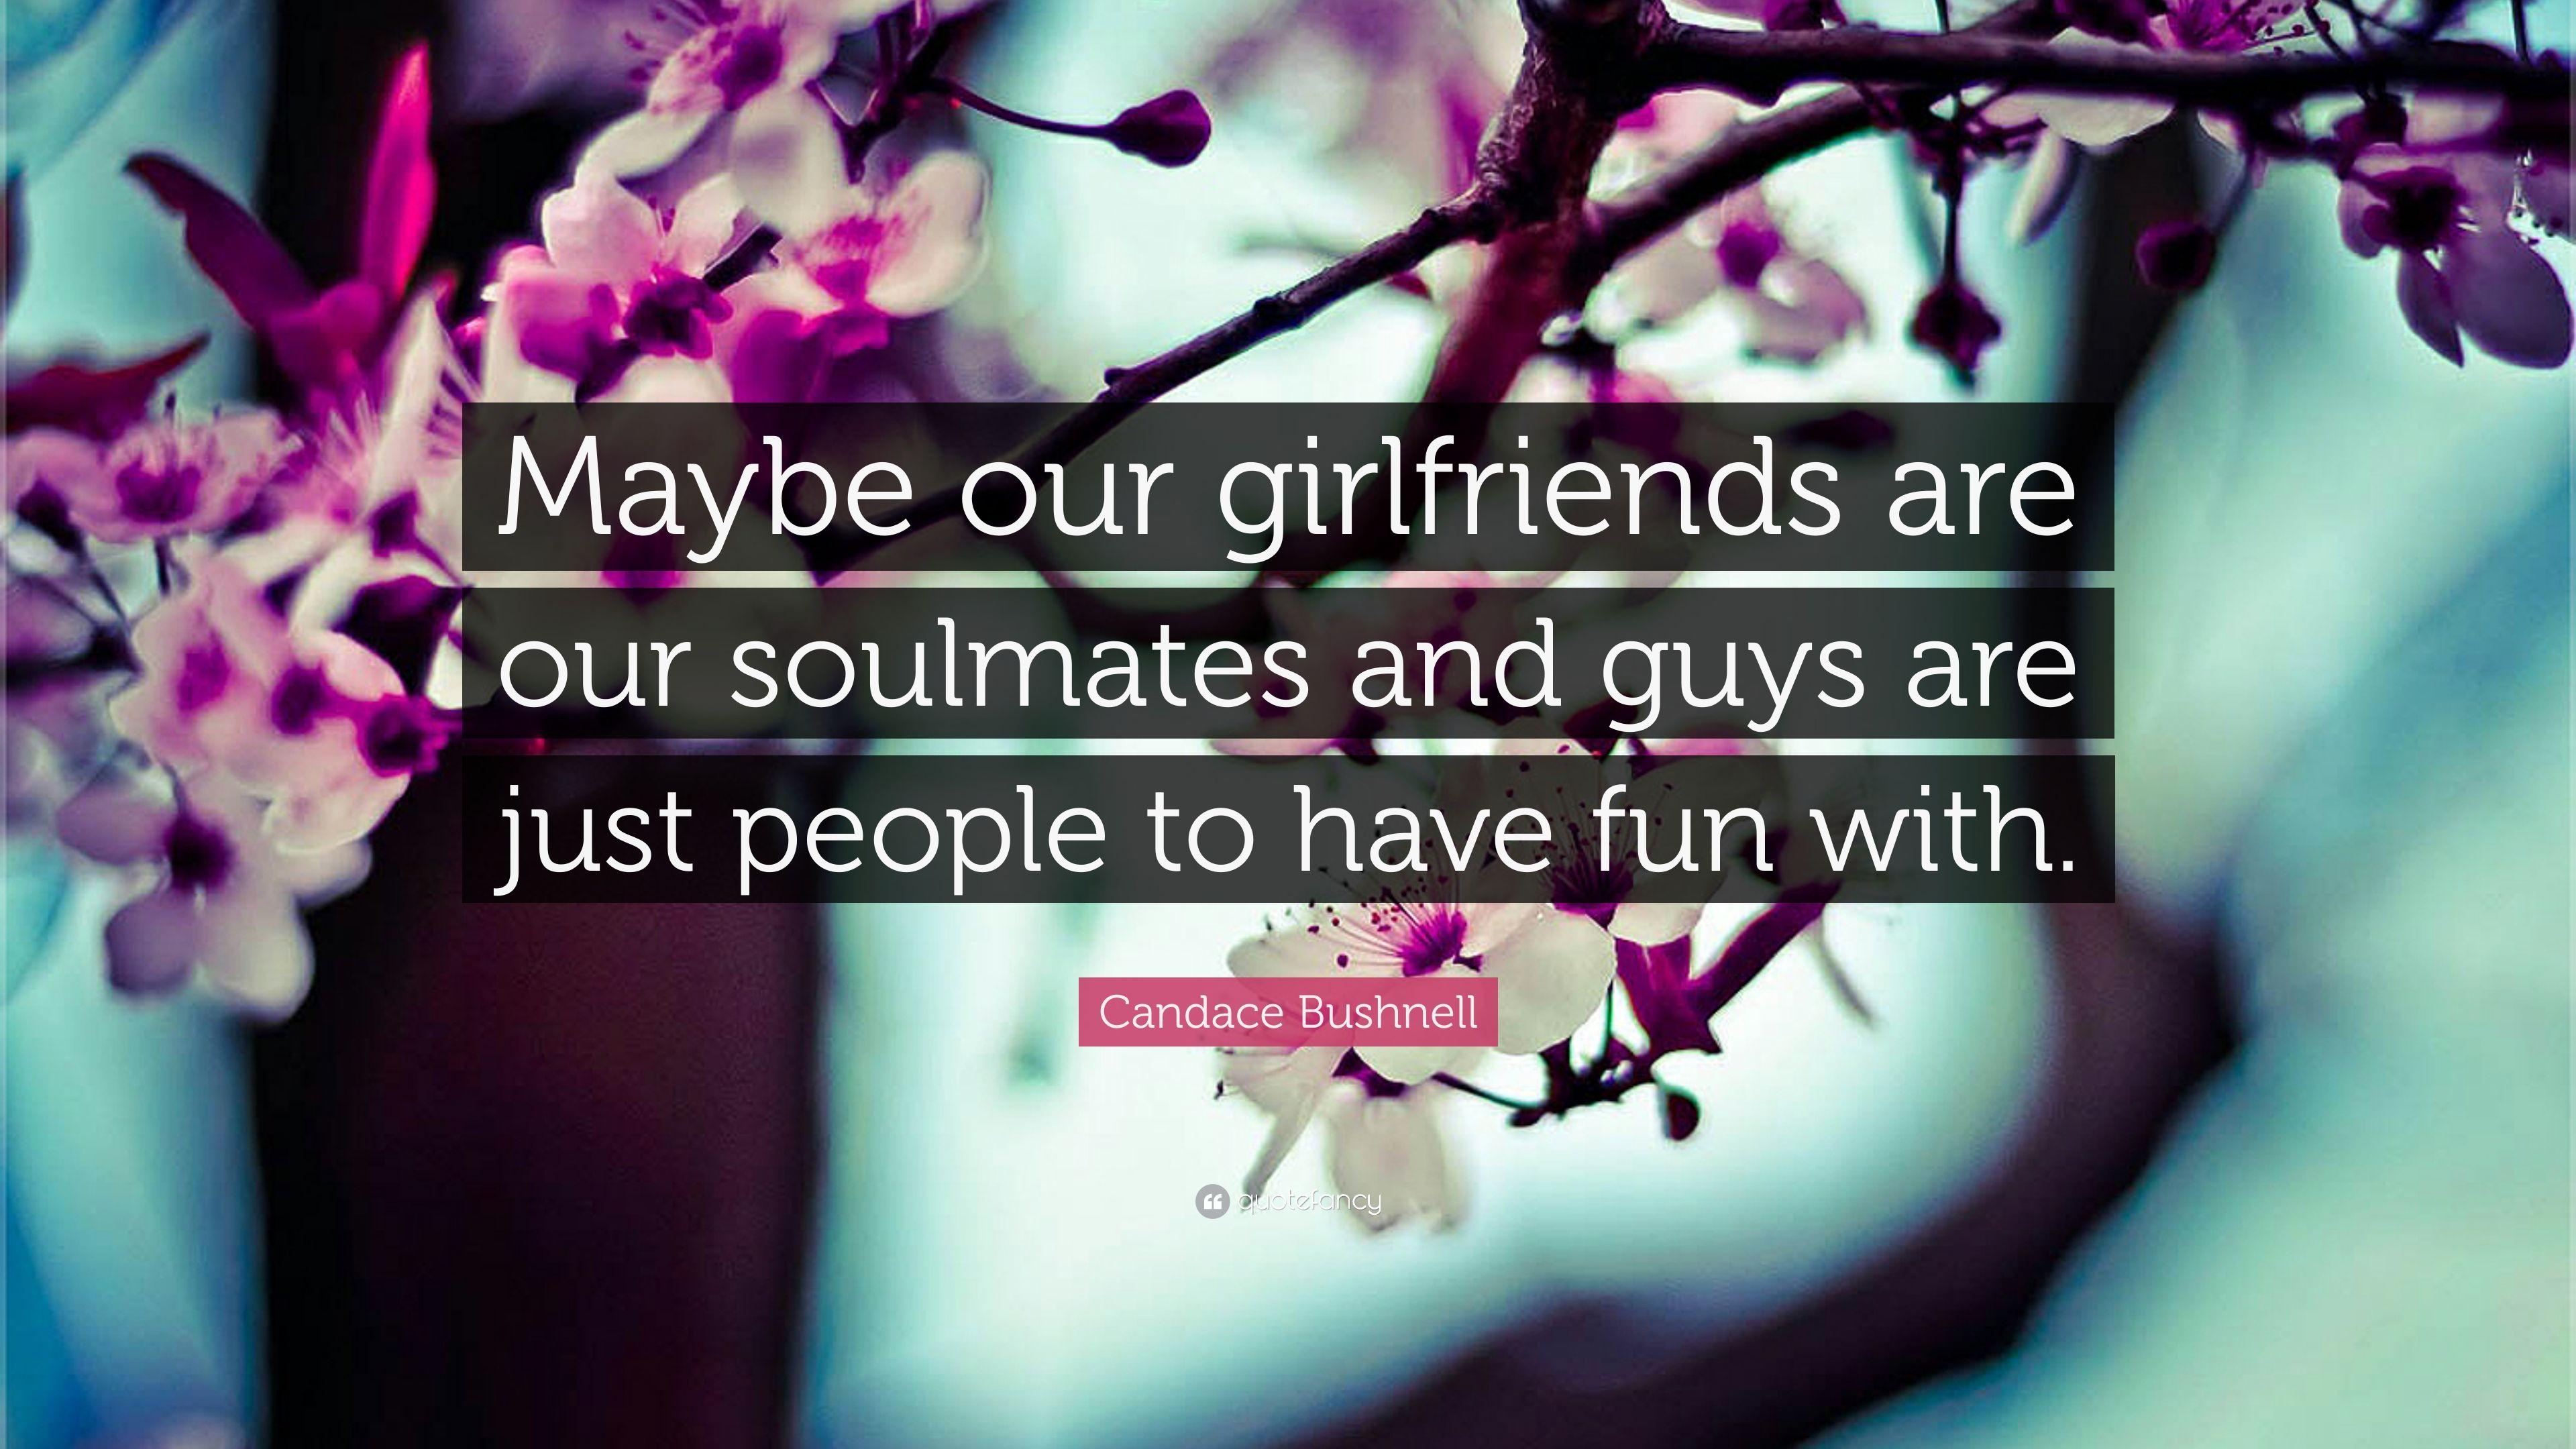 Candace Bushnell Quote: “Maybe our girlfriends are our soulmates